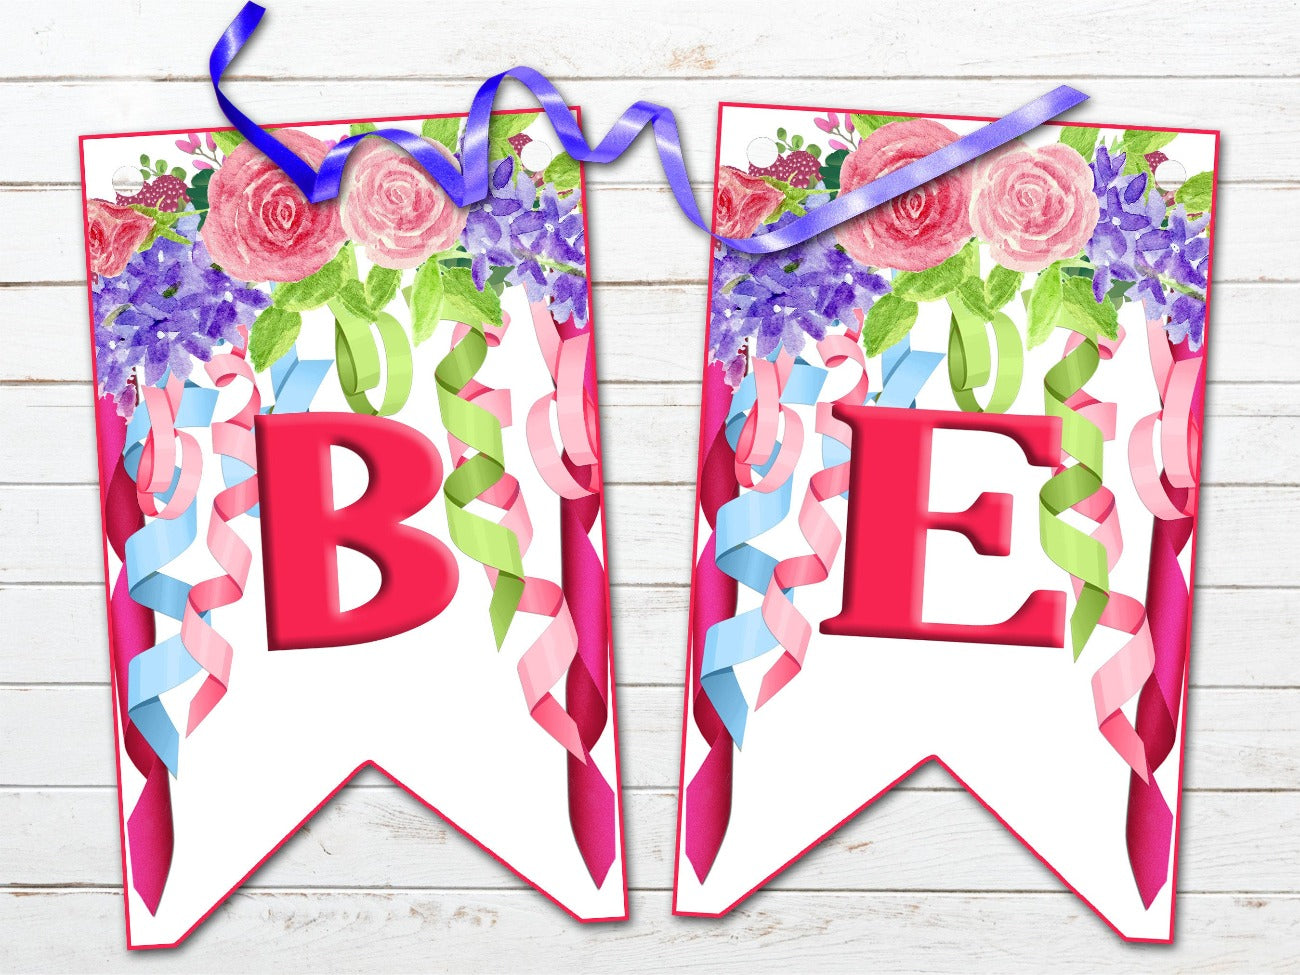 BELTANE BANNER, Pagan Altar Garland Decoration, B & E, each flag has pastel ribbons and flowers in colors of pink, mauve, green and blueoon a white background - Morgana Magick Spell